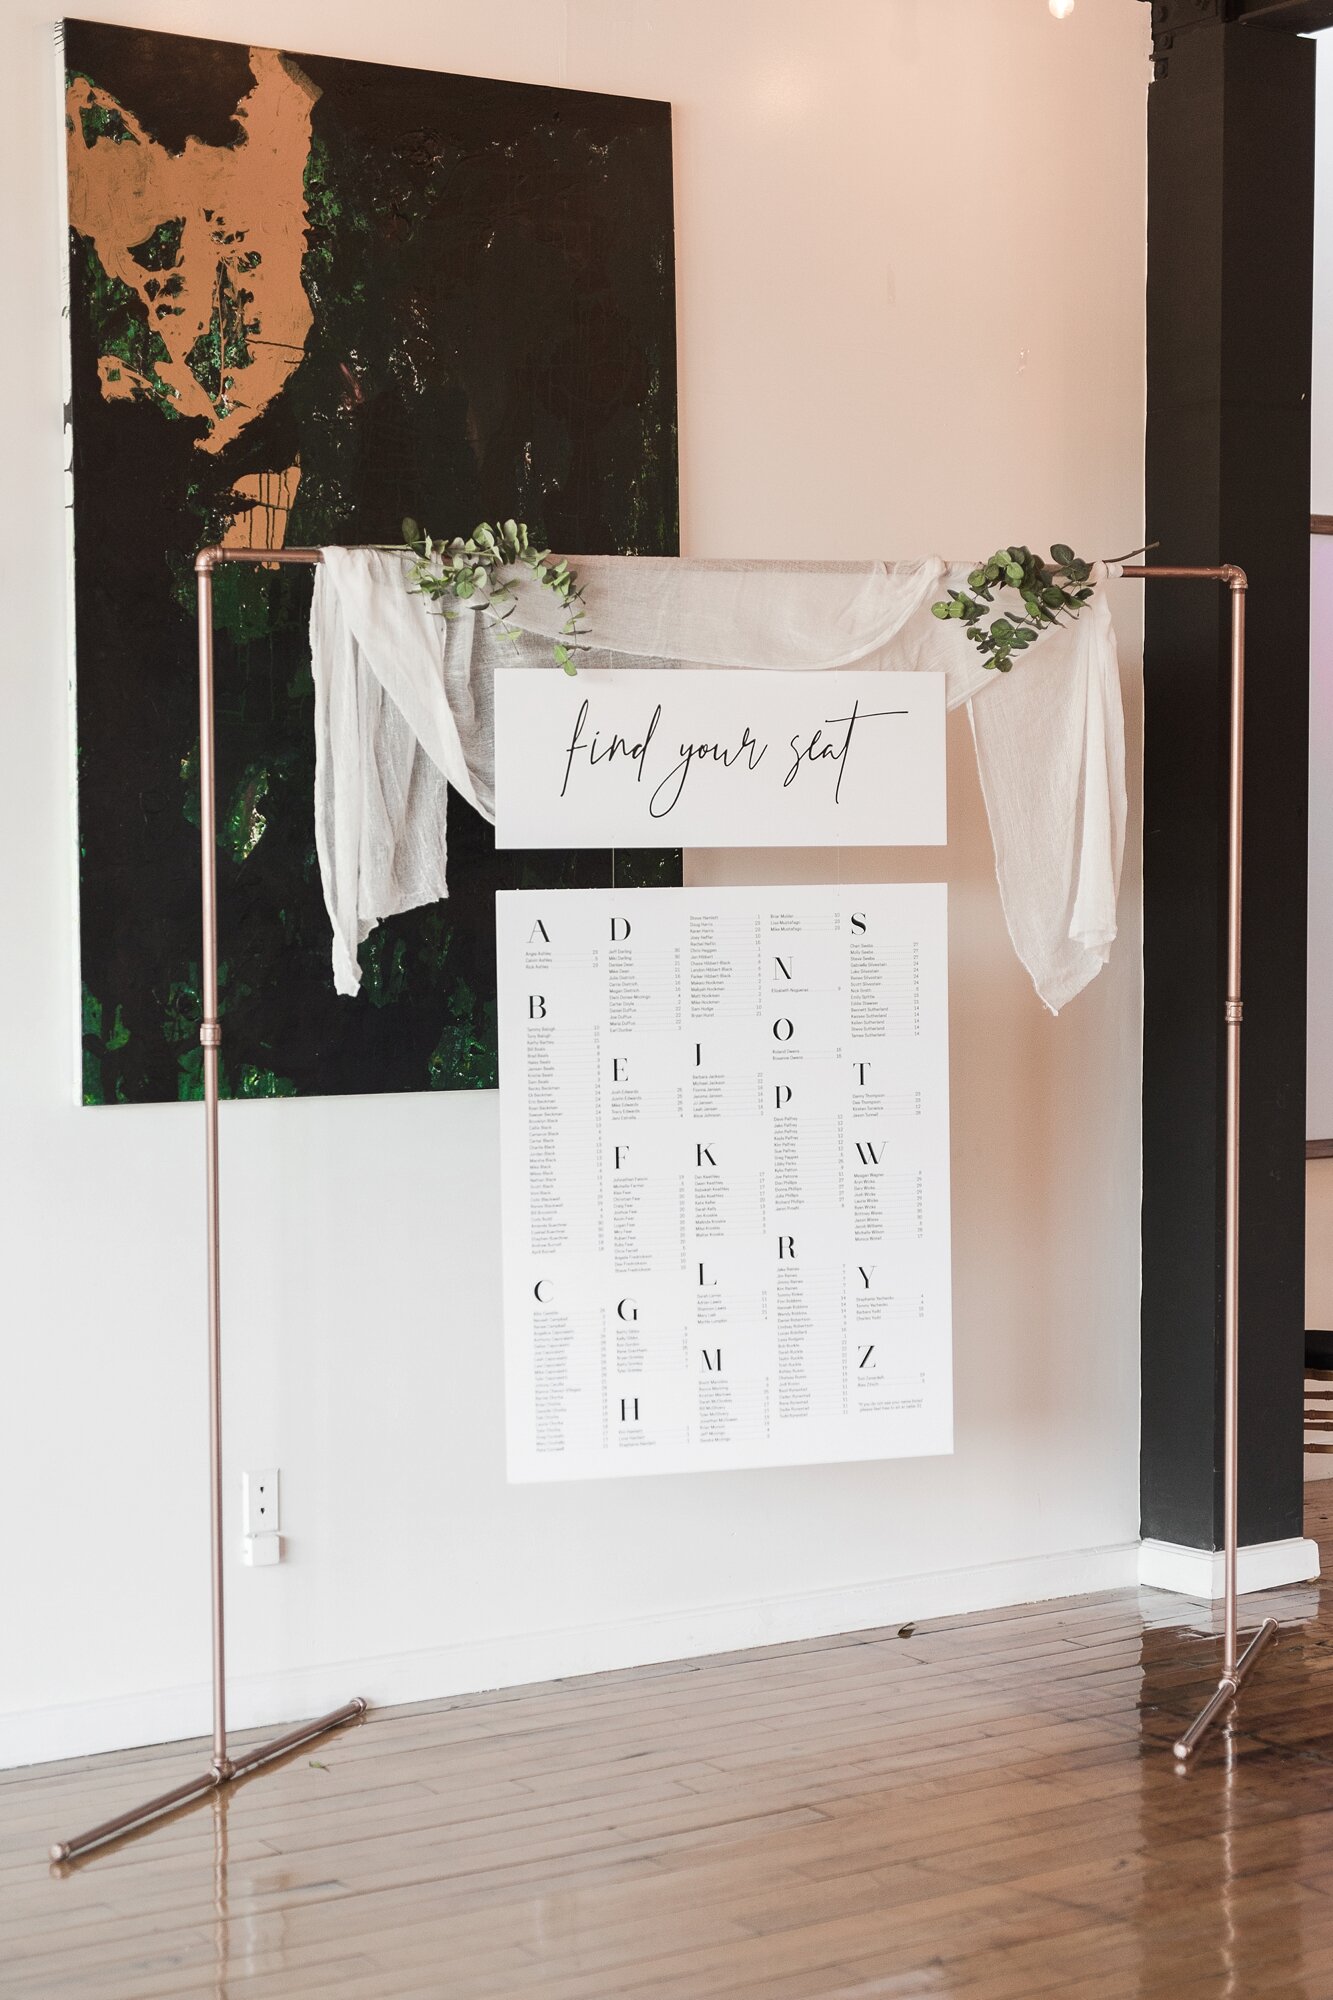  Jessica used our copper arch to hang her DIY seating chart! We loved how graphic and simple it is. So easy for guests to find their seats! 